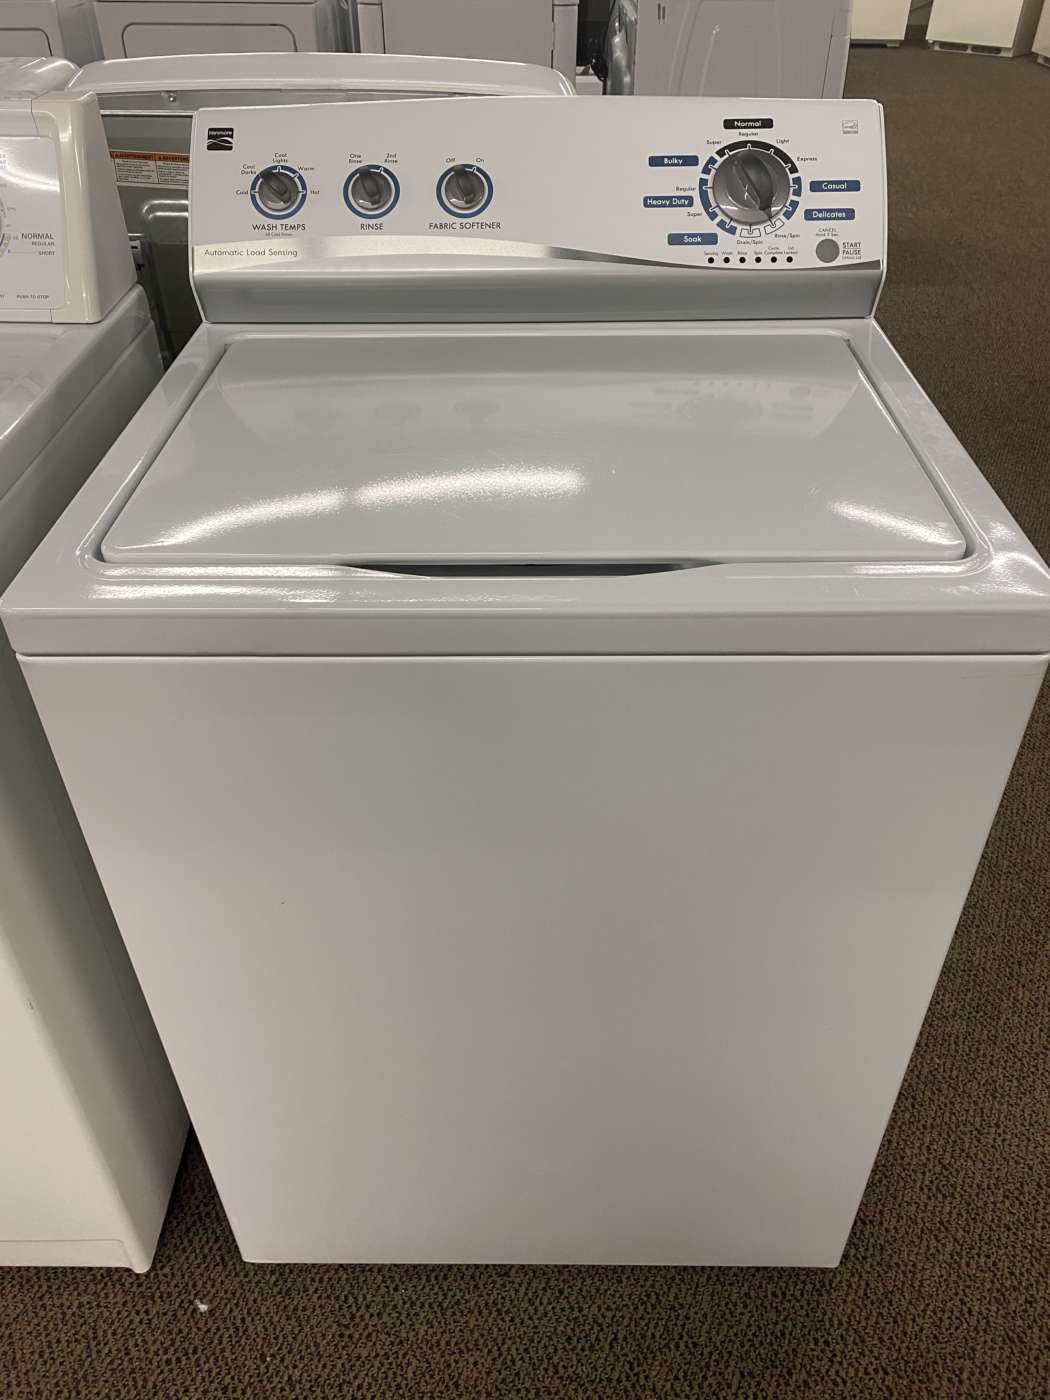 Reconditioned KENMORE 3.5 Cu. Ft. Top-Load Washer – White